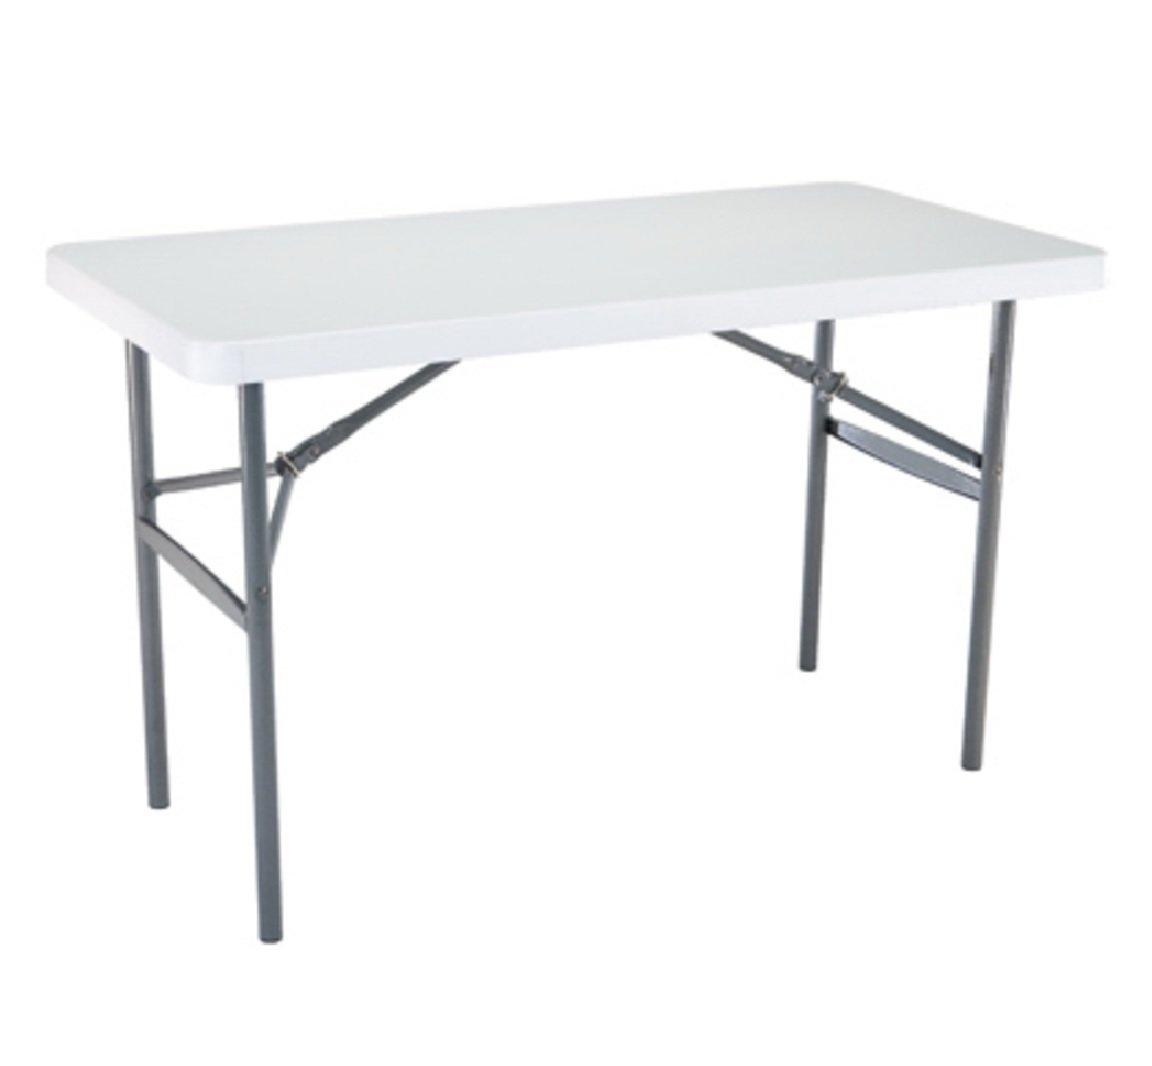 171092 24 X 48 In. White Folding Table